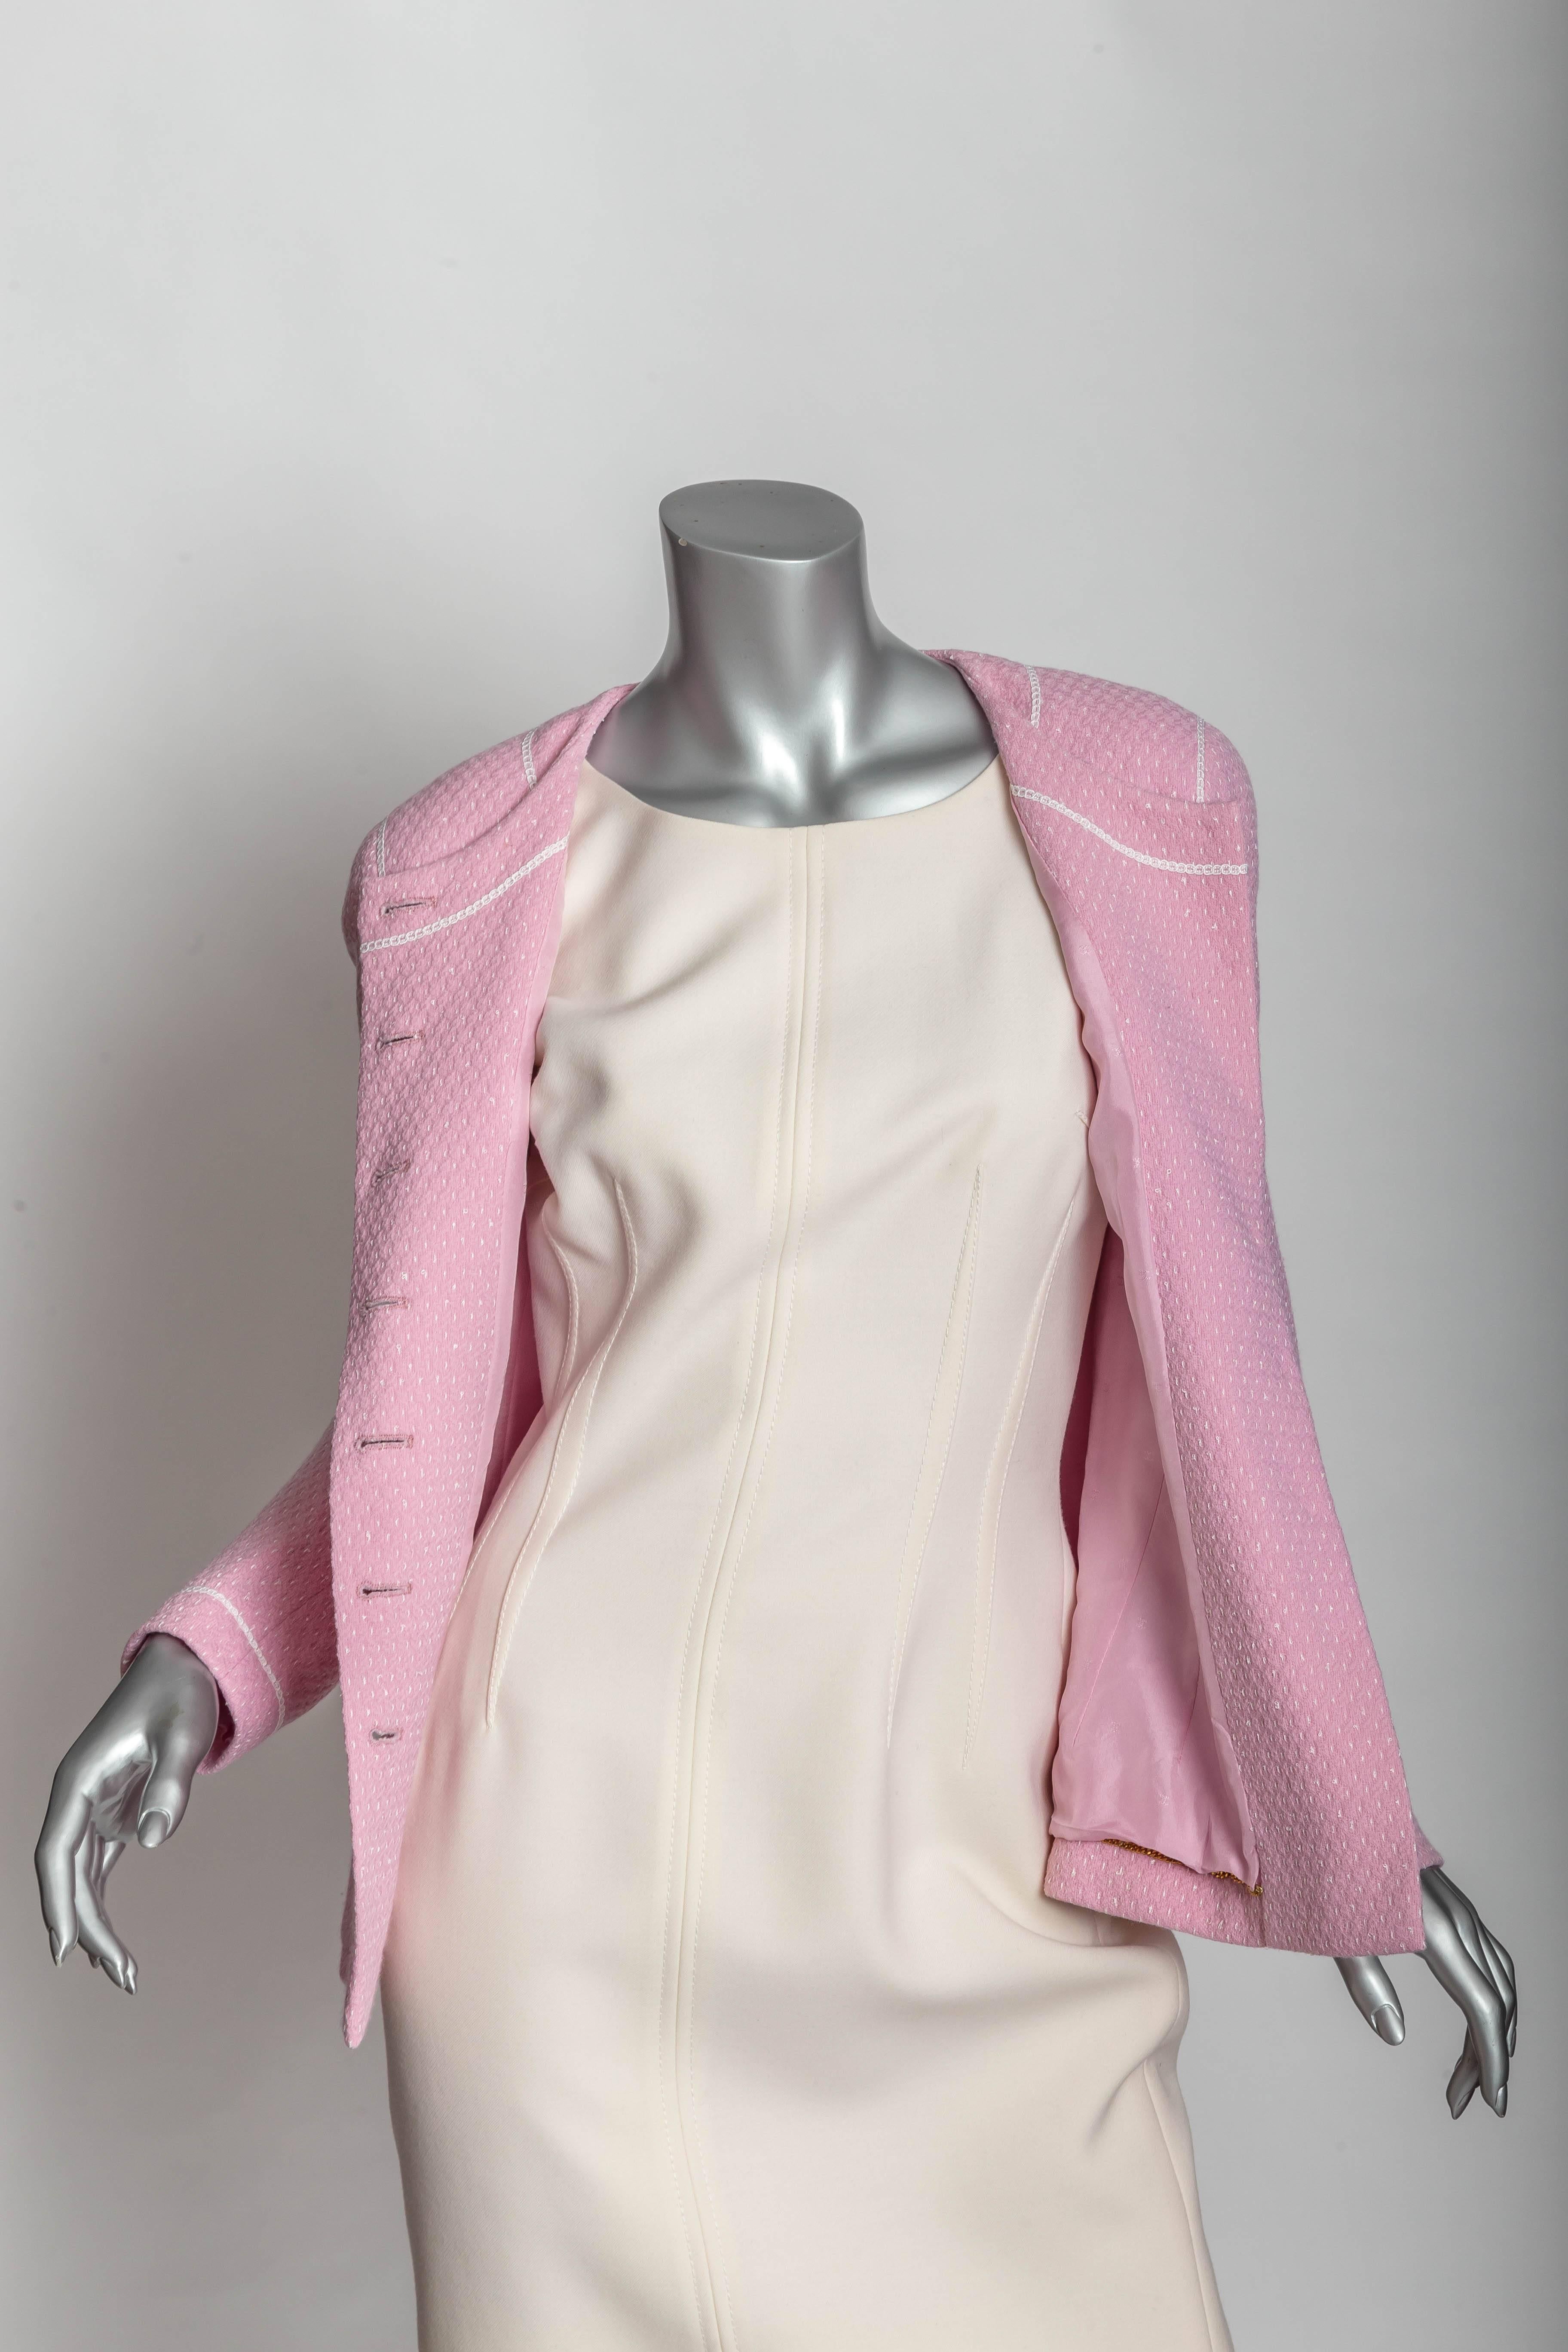 Chanel Jacket in Pink with Chanel Logo Buttons - 42 2